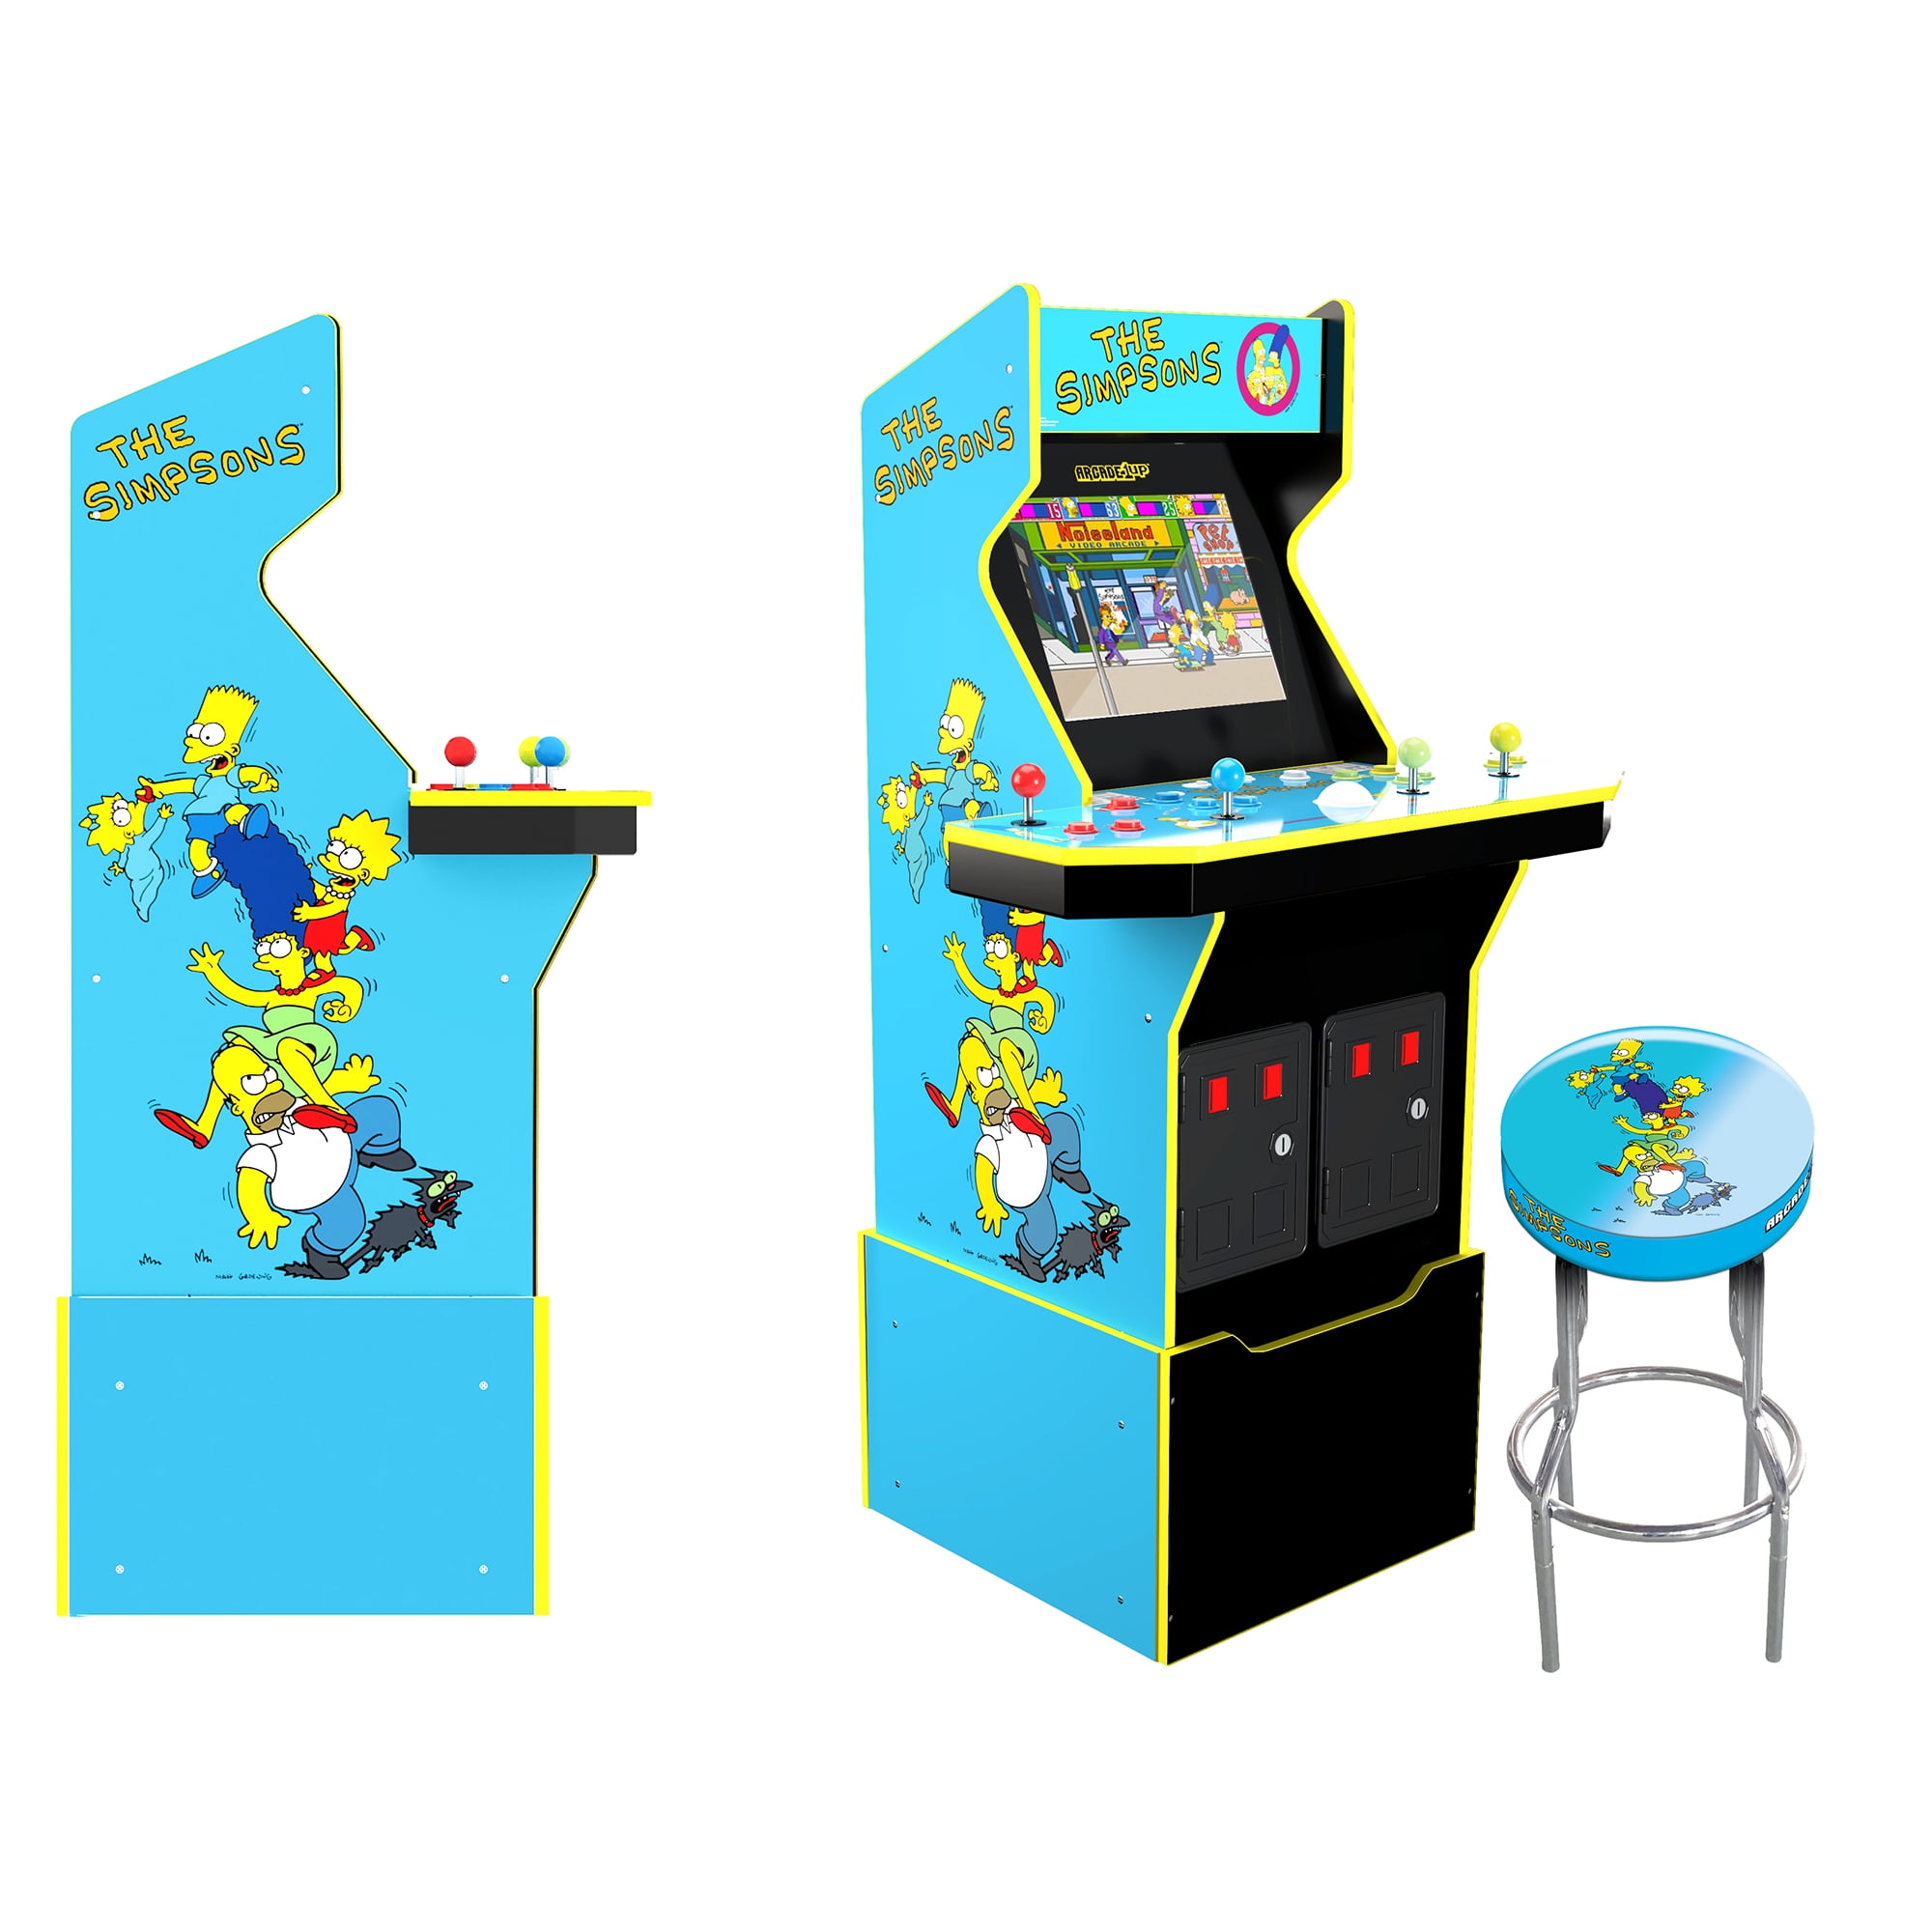 Play Arcade The Simpsons (2 Players World, set 1) Online in your browser 